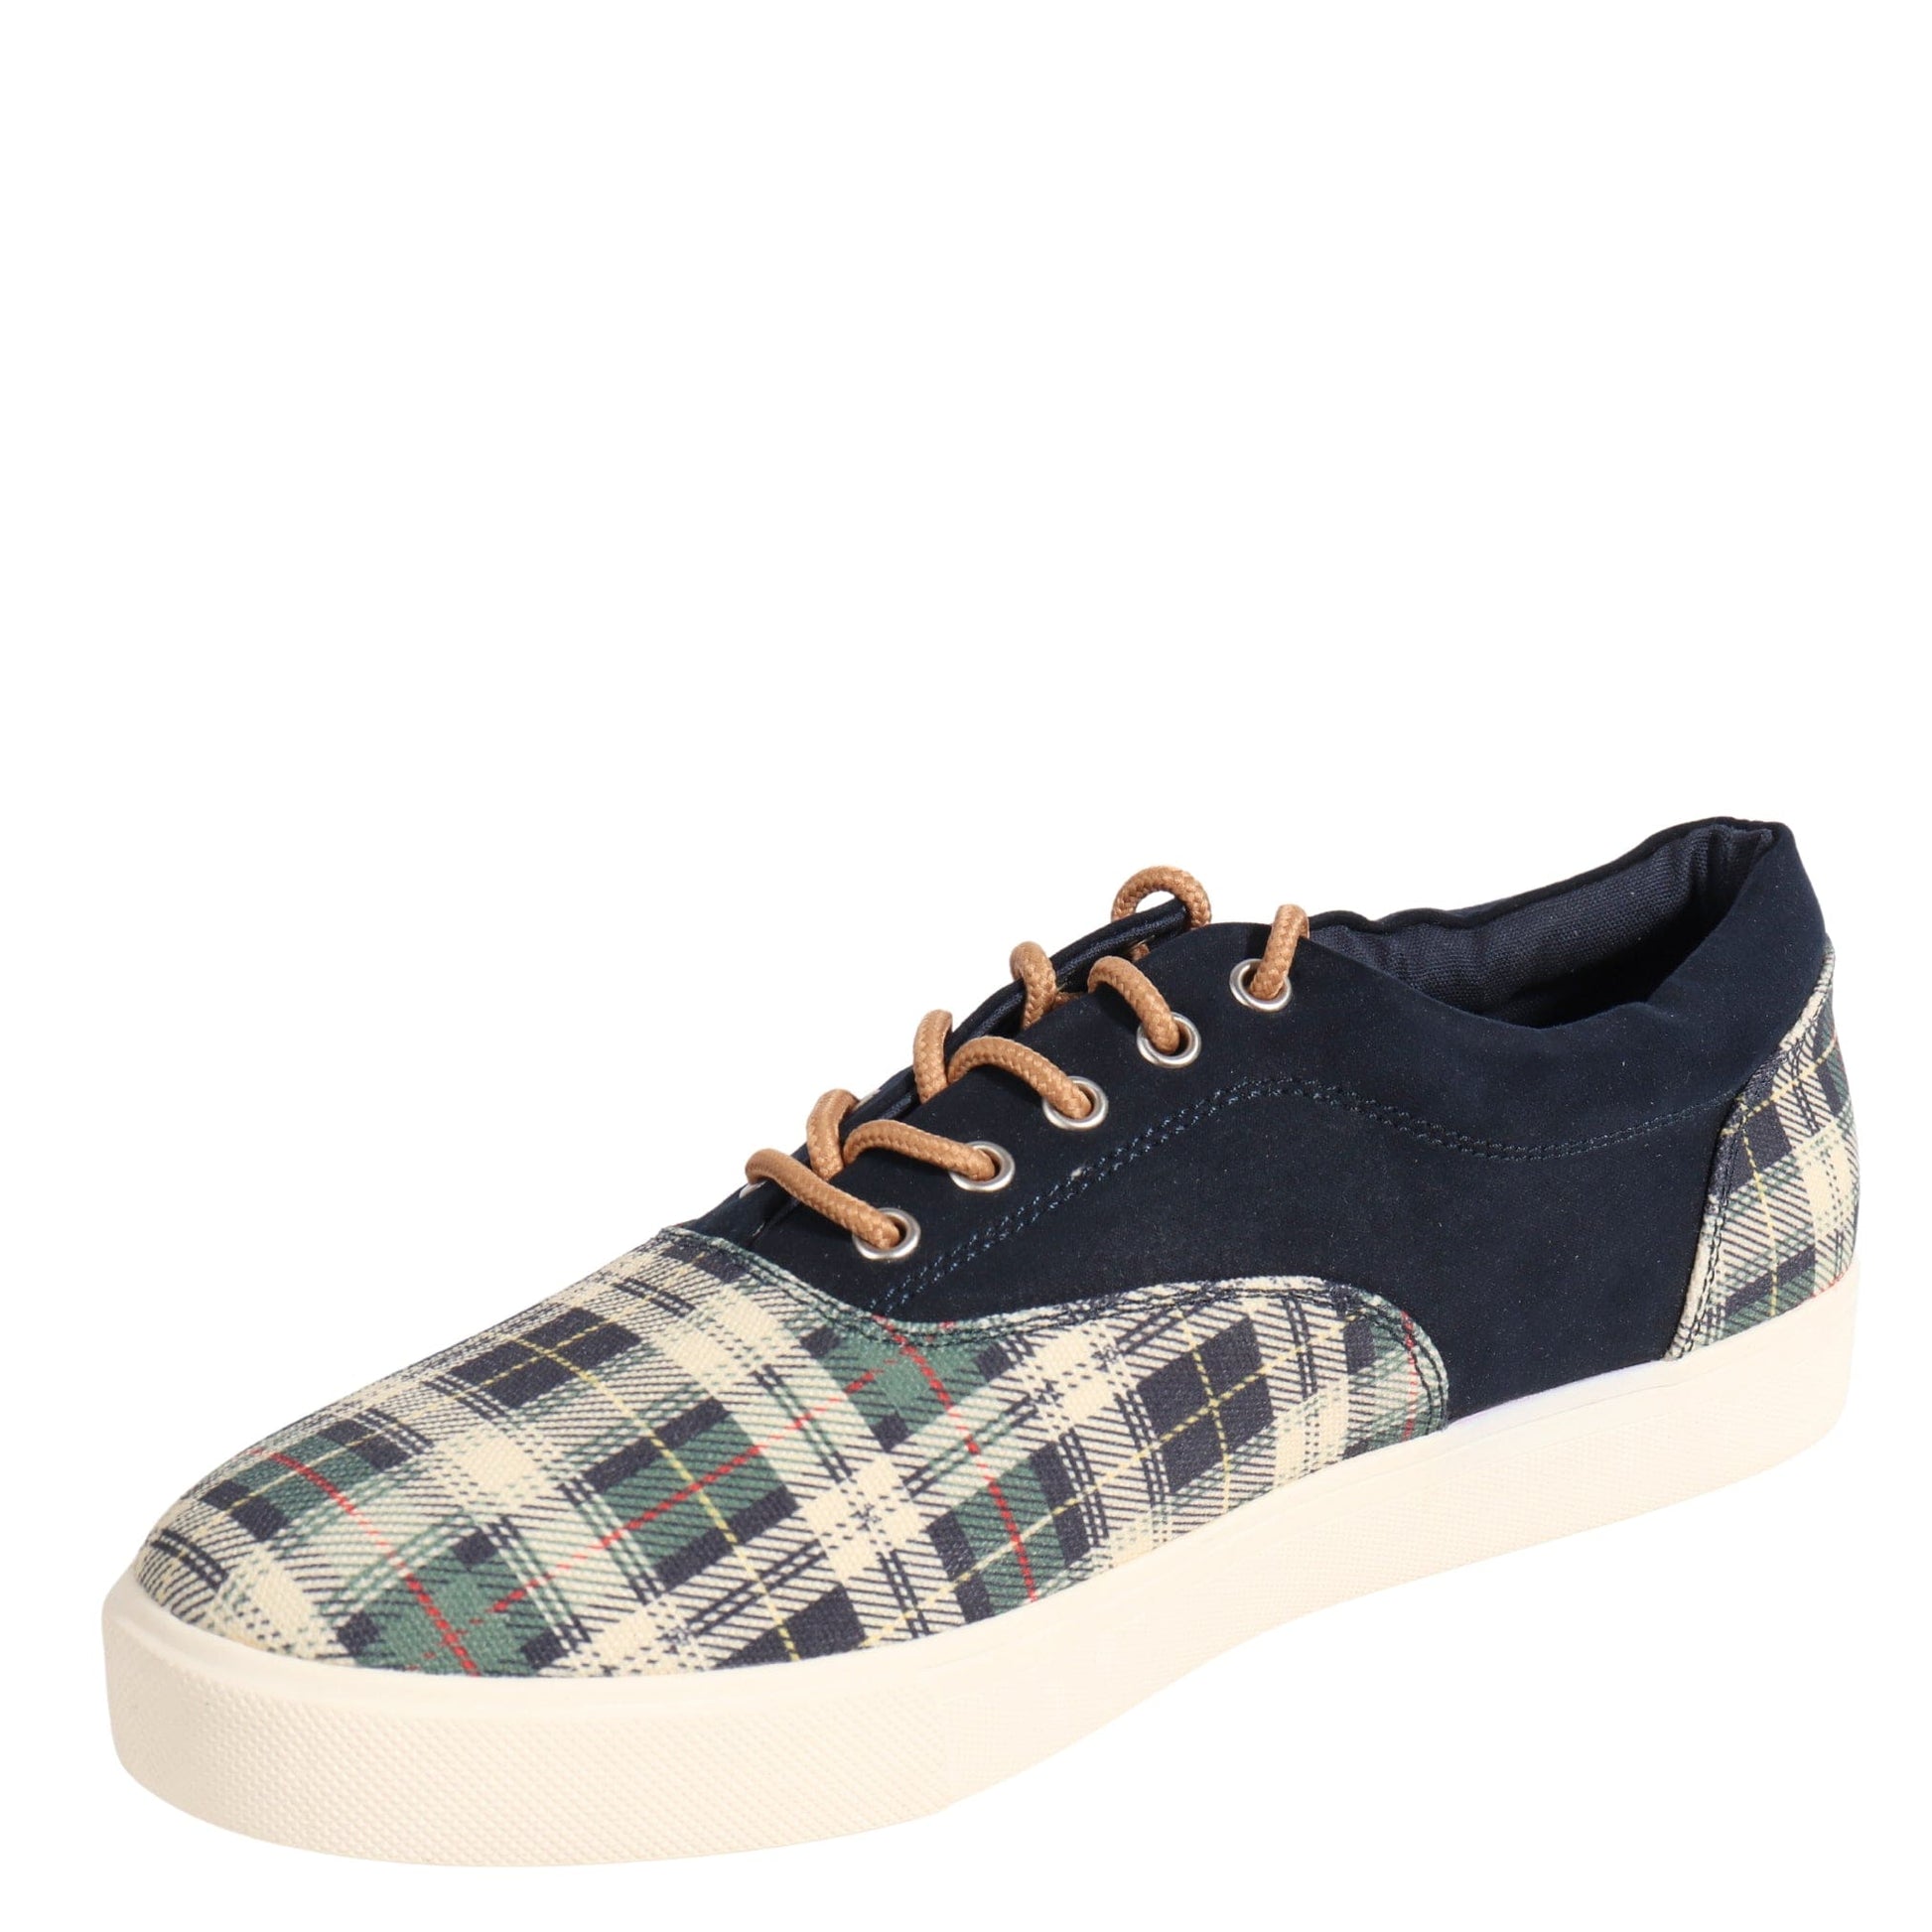 CLUB ROOM Mens Shoes 43 / Navy CLUB ROOM - Colorblocked Lace-up Sneakers